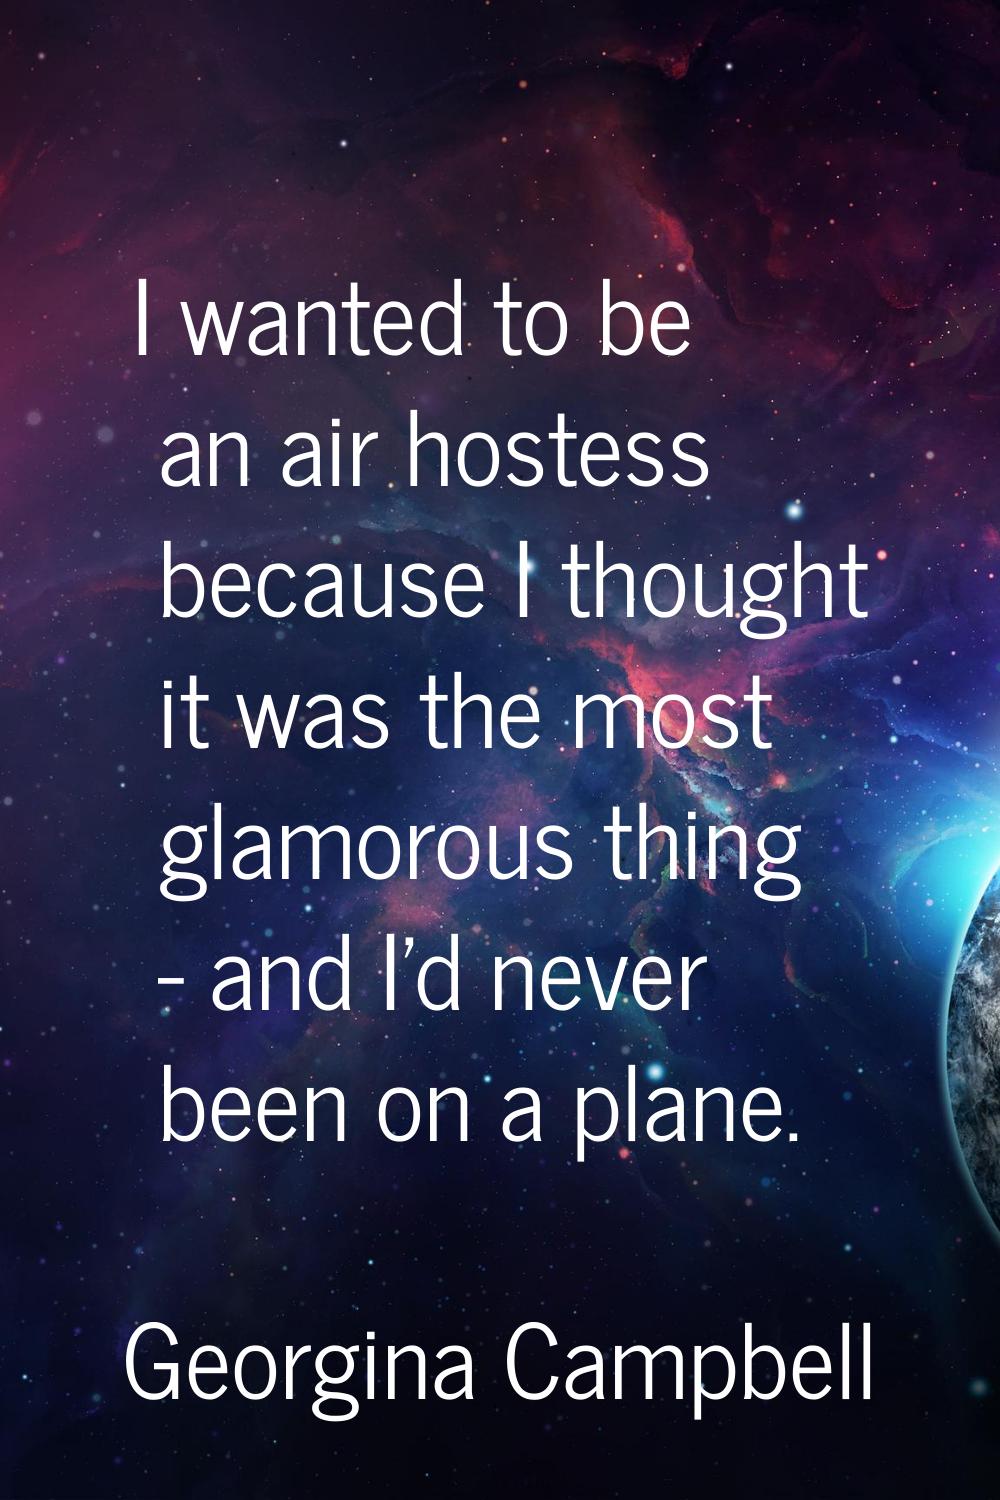 I wanted to be an air hostess because I thought it was the most glamorous thing - and I'd never bee